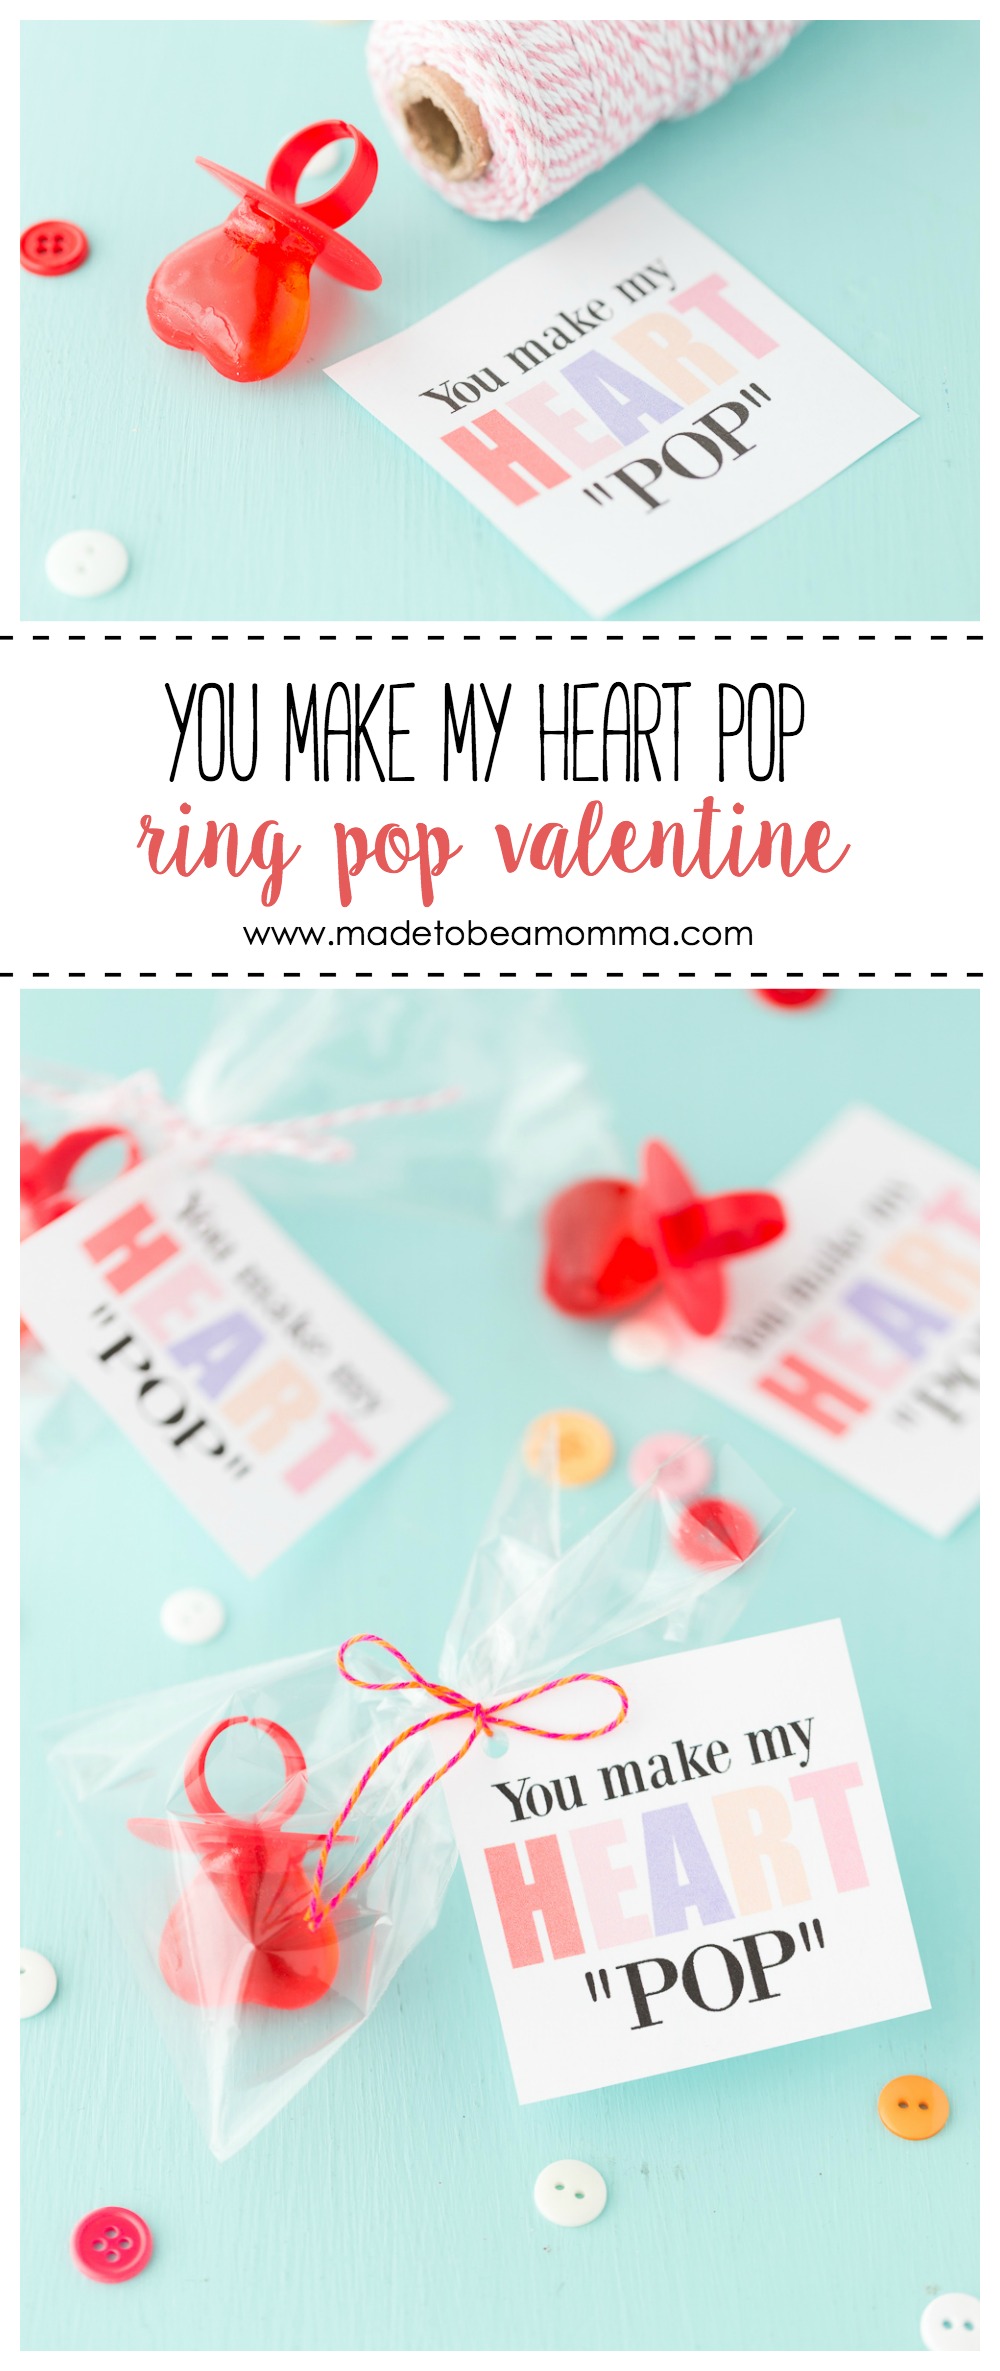 Ring Pop Valentine Made To Be A Momma